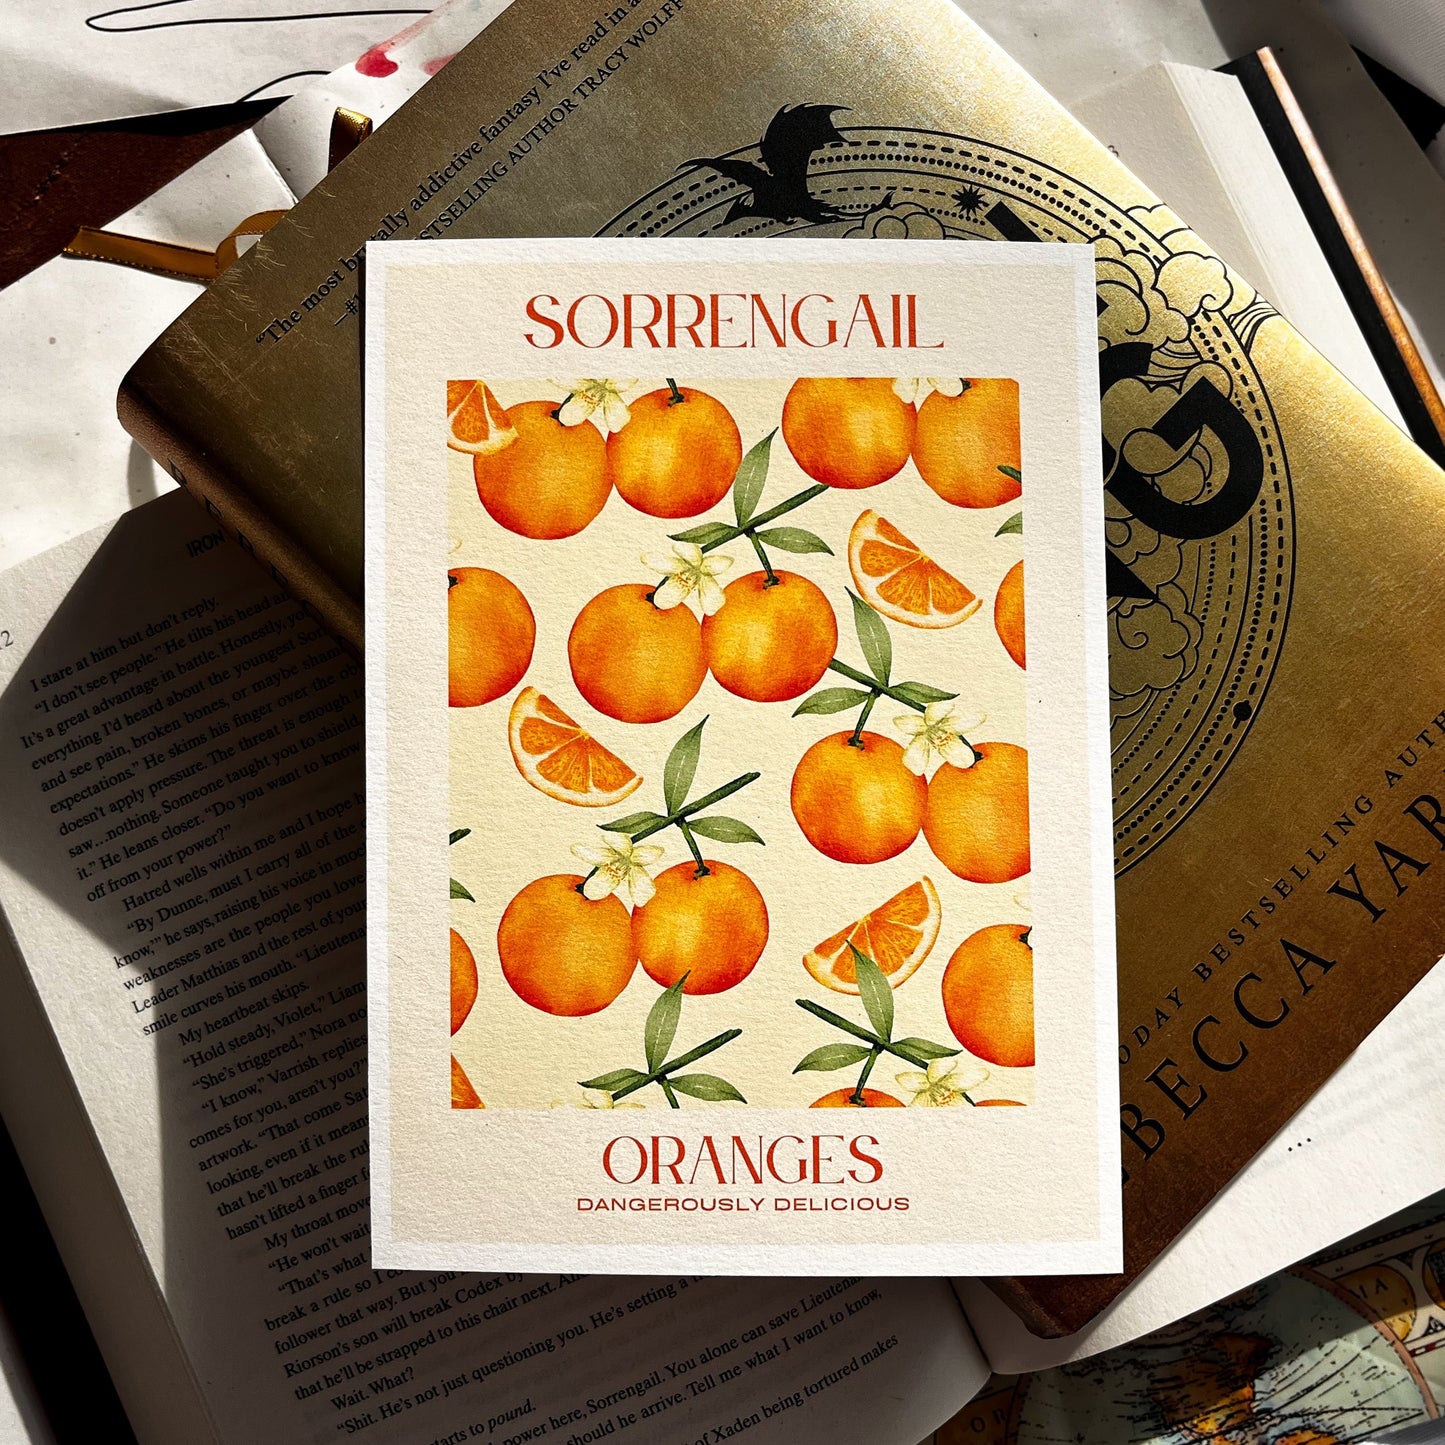 Fourth Wing - Violet Sorrengail Oranges 5x7 Poster - The Empyrean Series Art Print